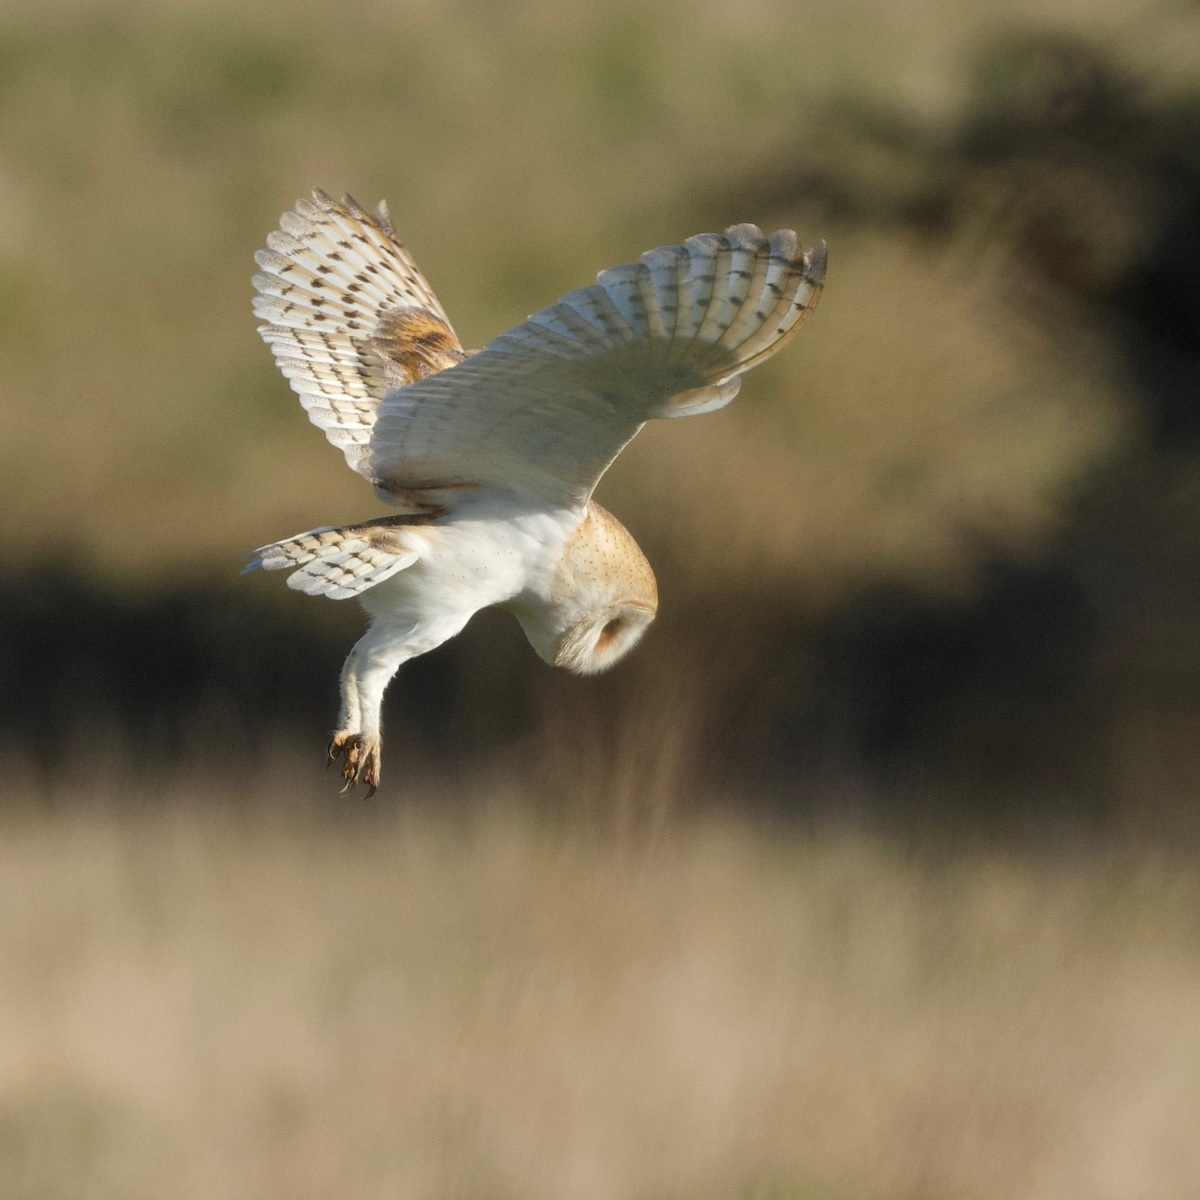 In one fell swoop - Jeff Biddle saw this barn owl hunting